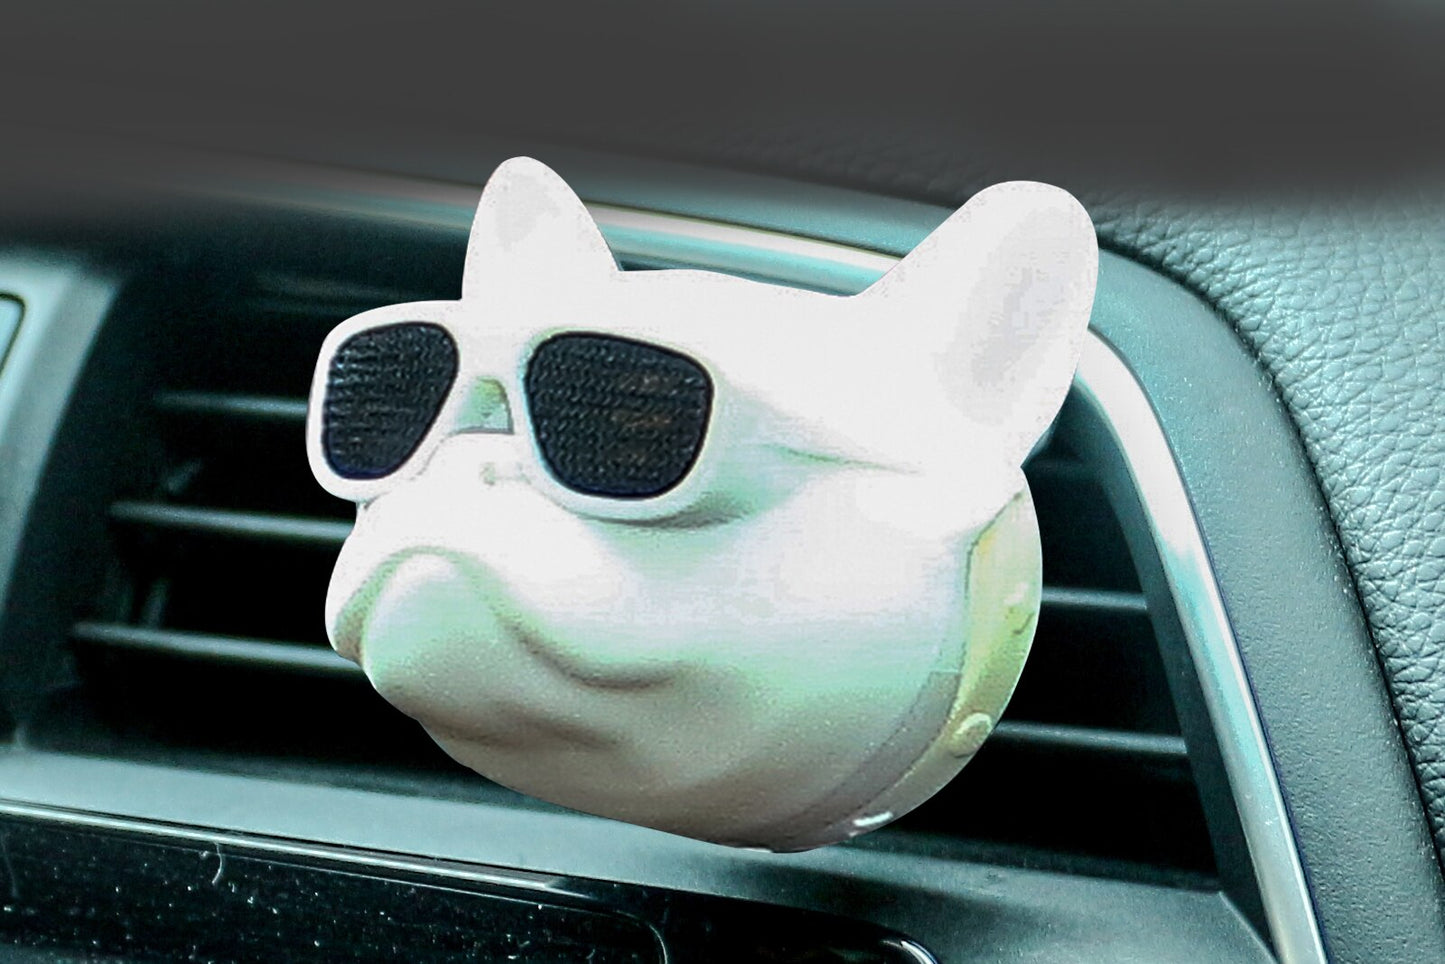 French Bulldog Car Air freshener - Style's Bug White / Without any incense flakes